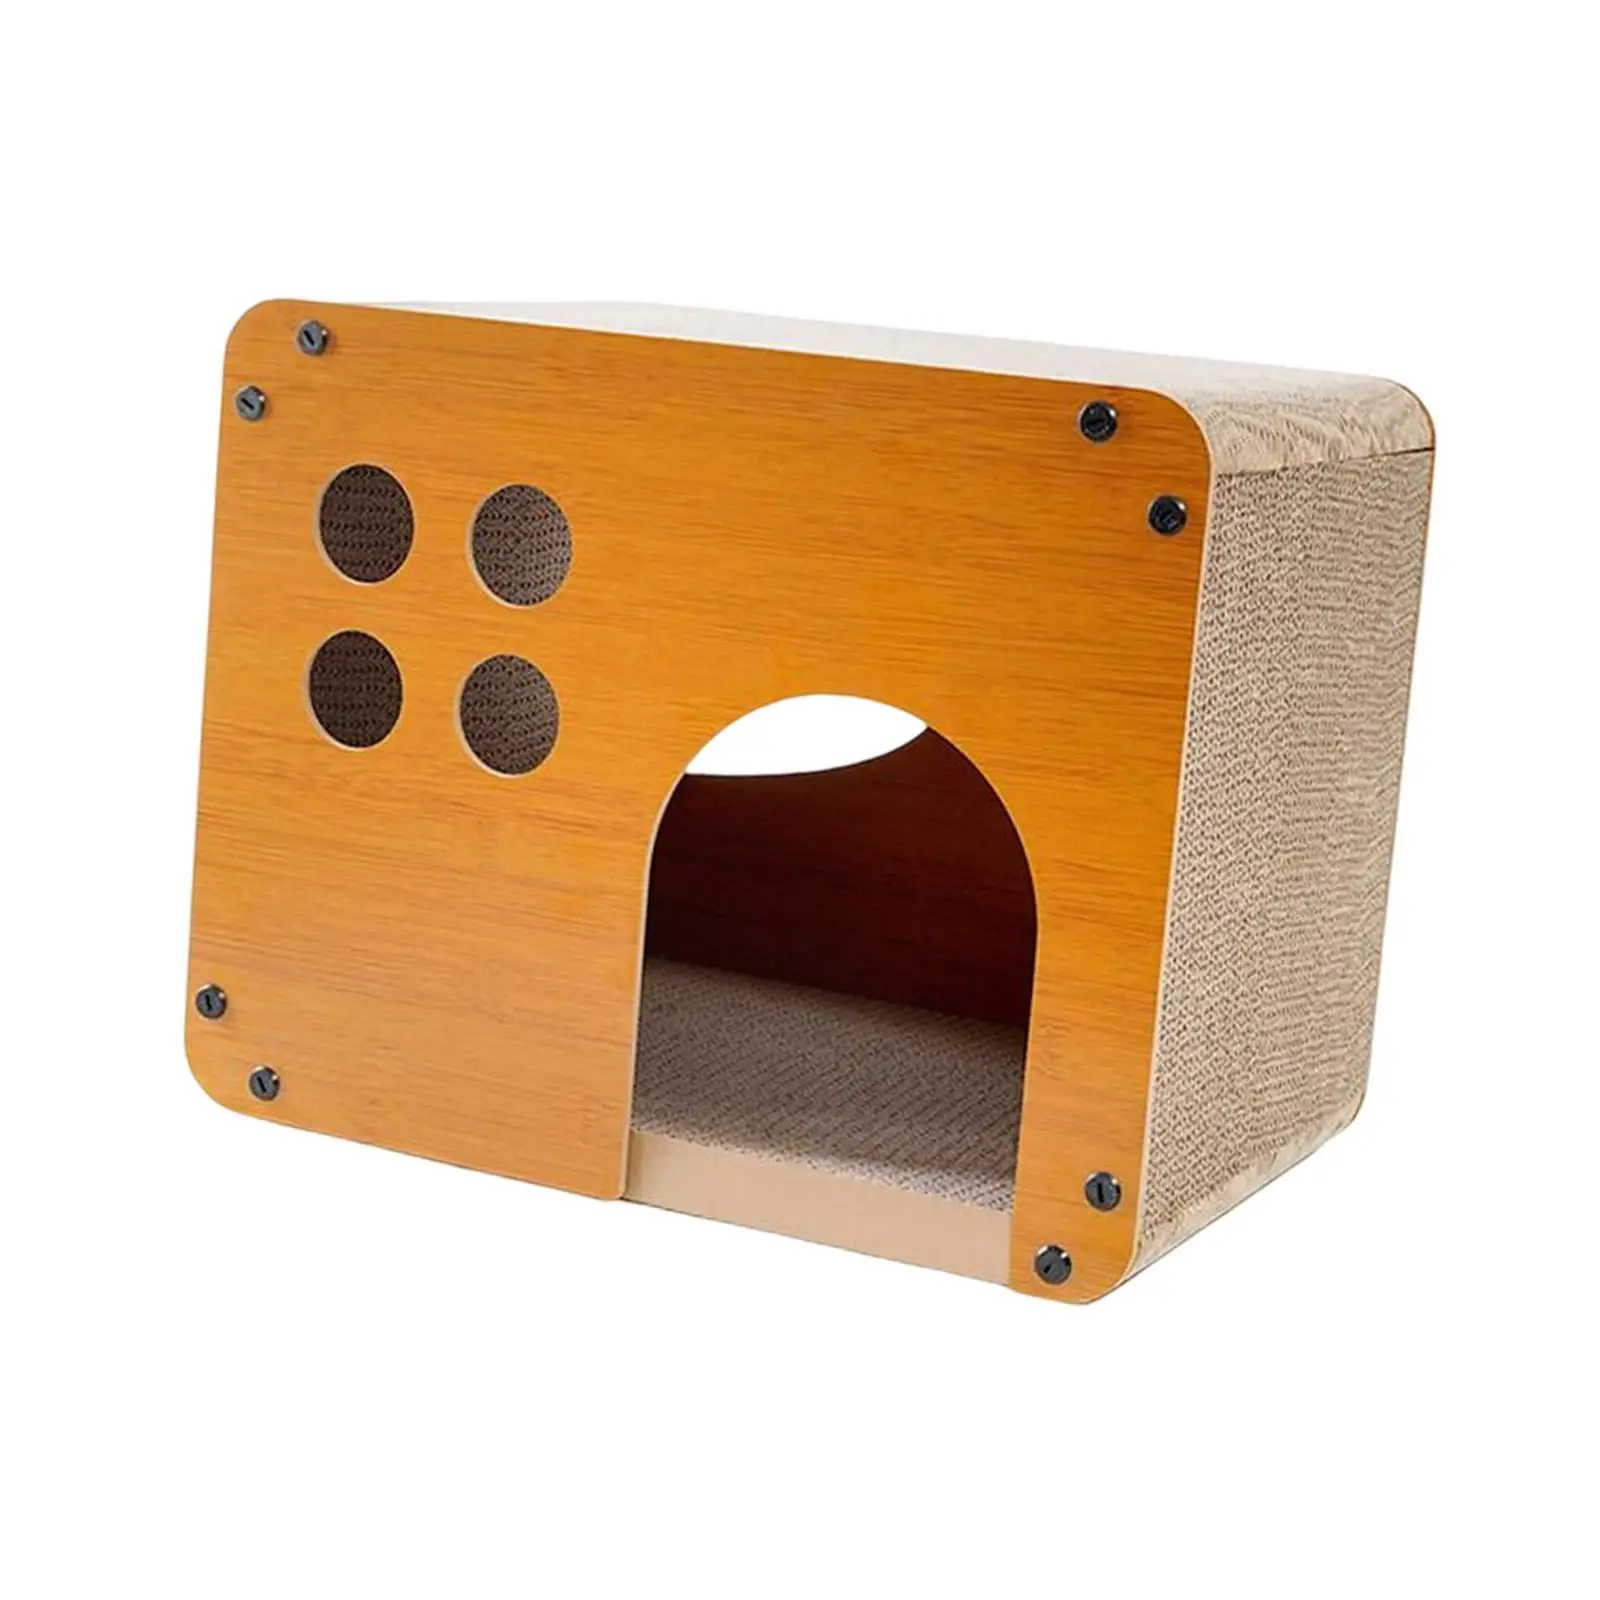 Pets Cave Corrugated Cardboard Breathable Compact Household Wooden Cat Dog House Sleeping Bed Kennel for Small Dogs Kitten Puppy